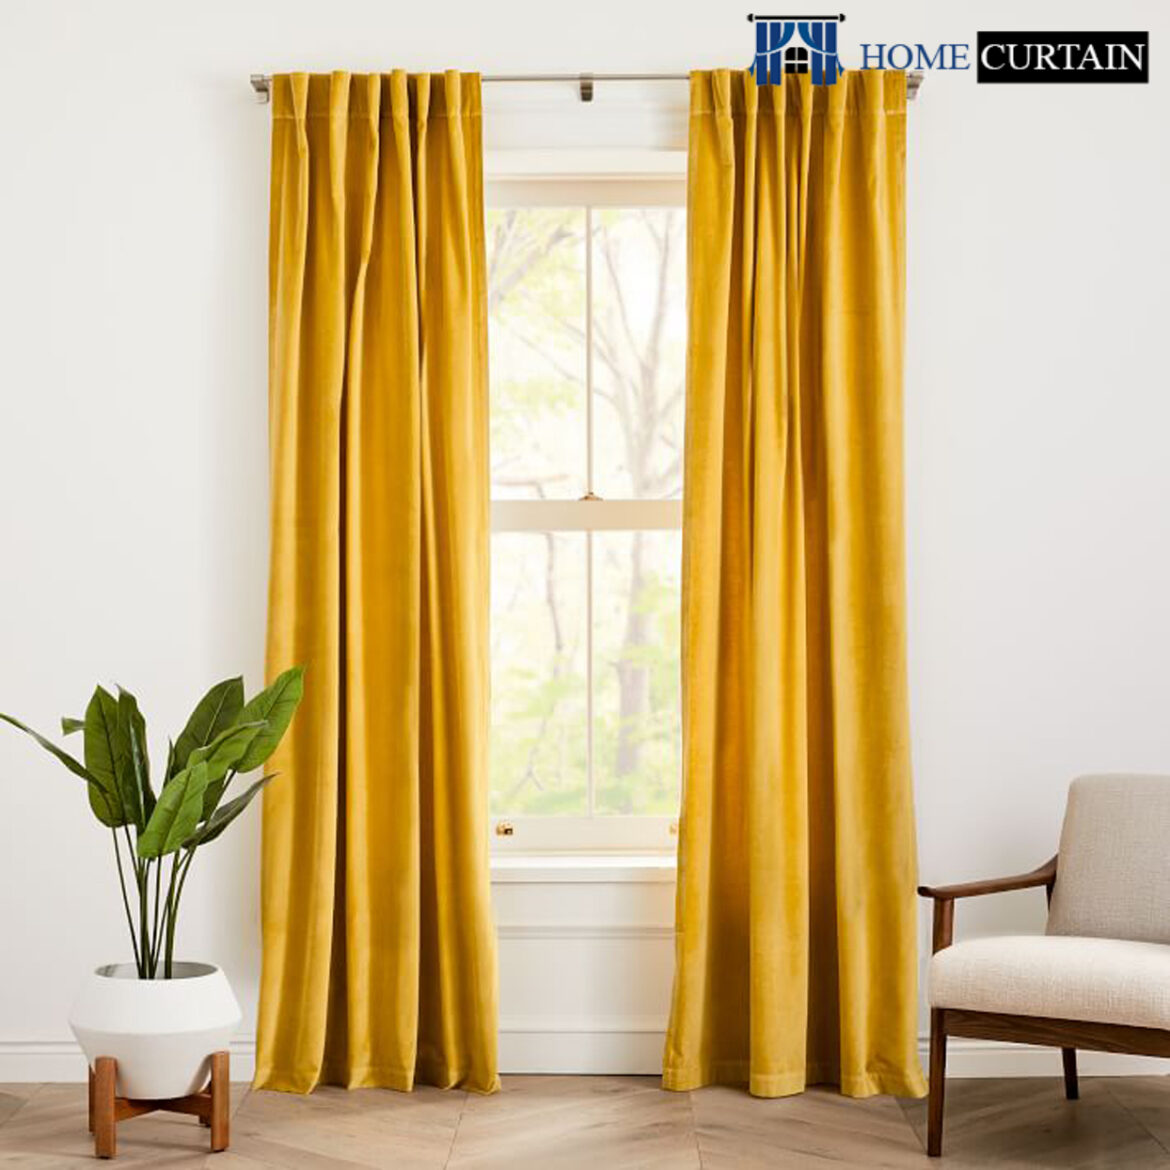 Things to consider when buying living room curtains Dubai